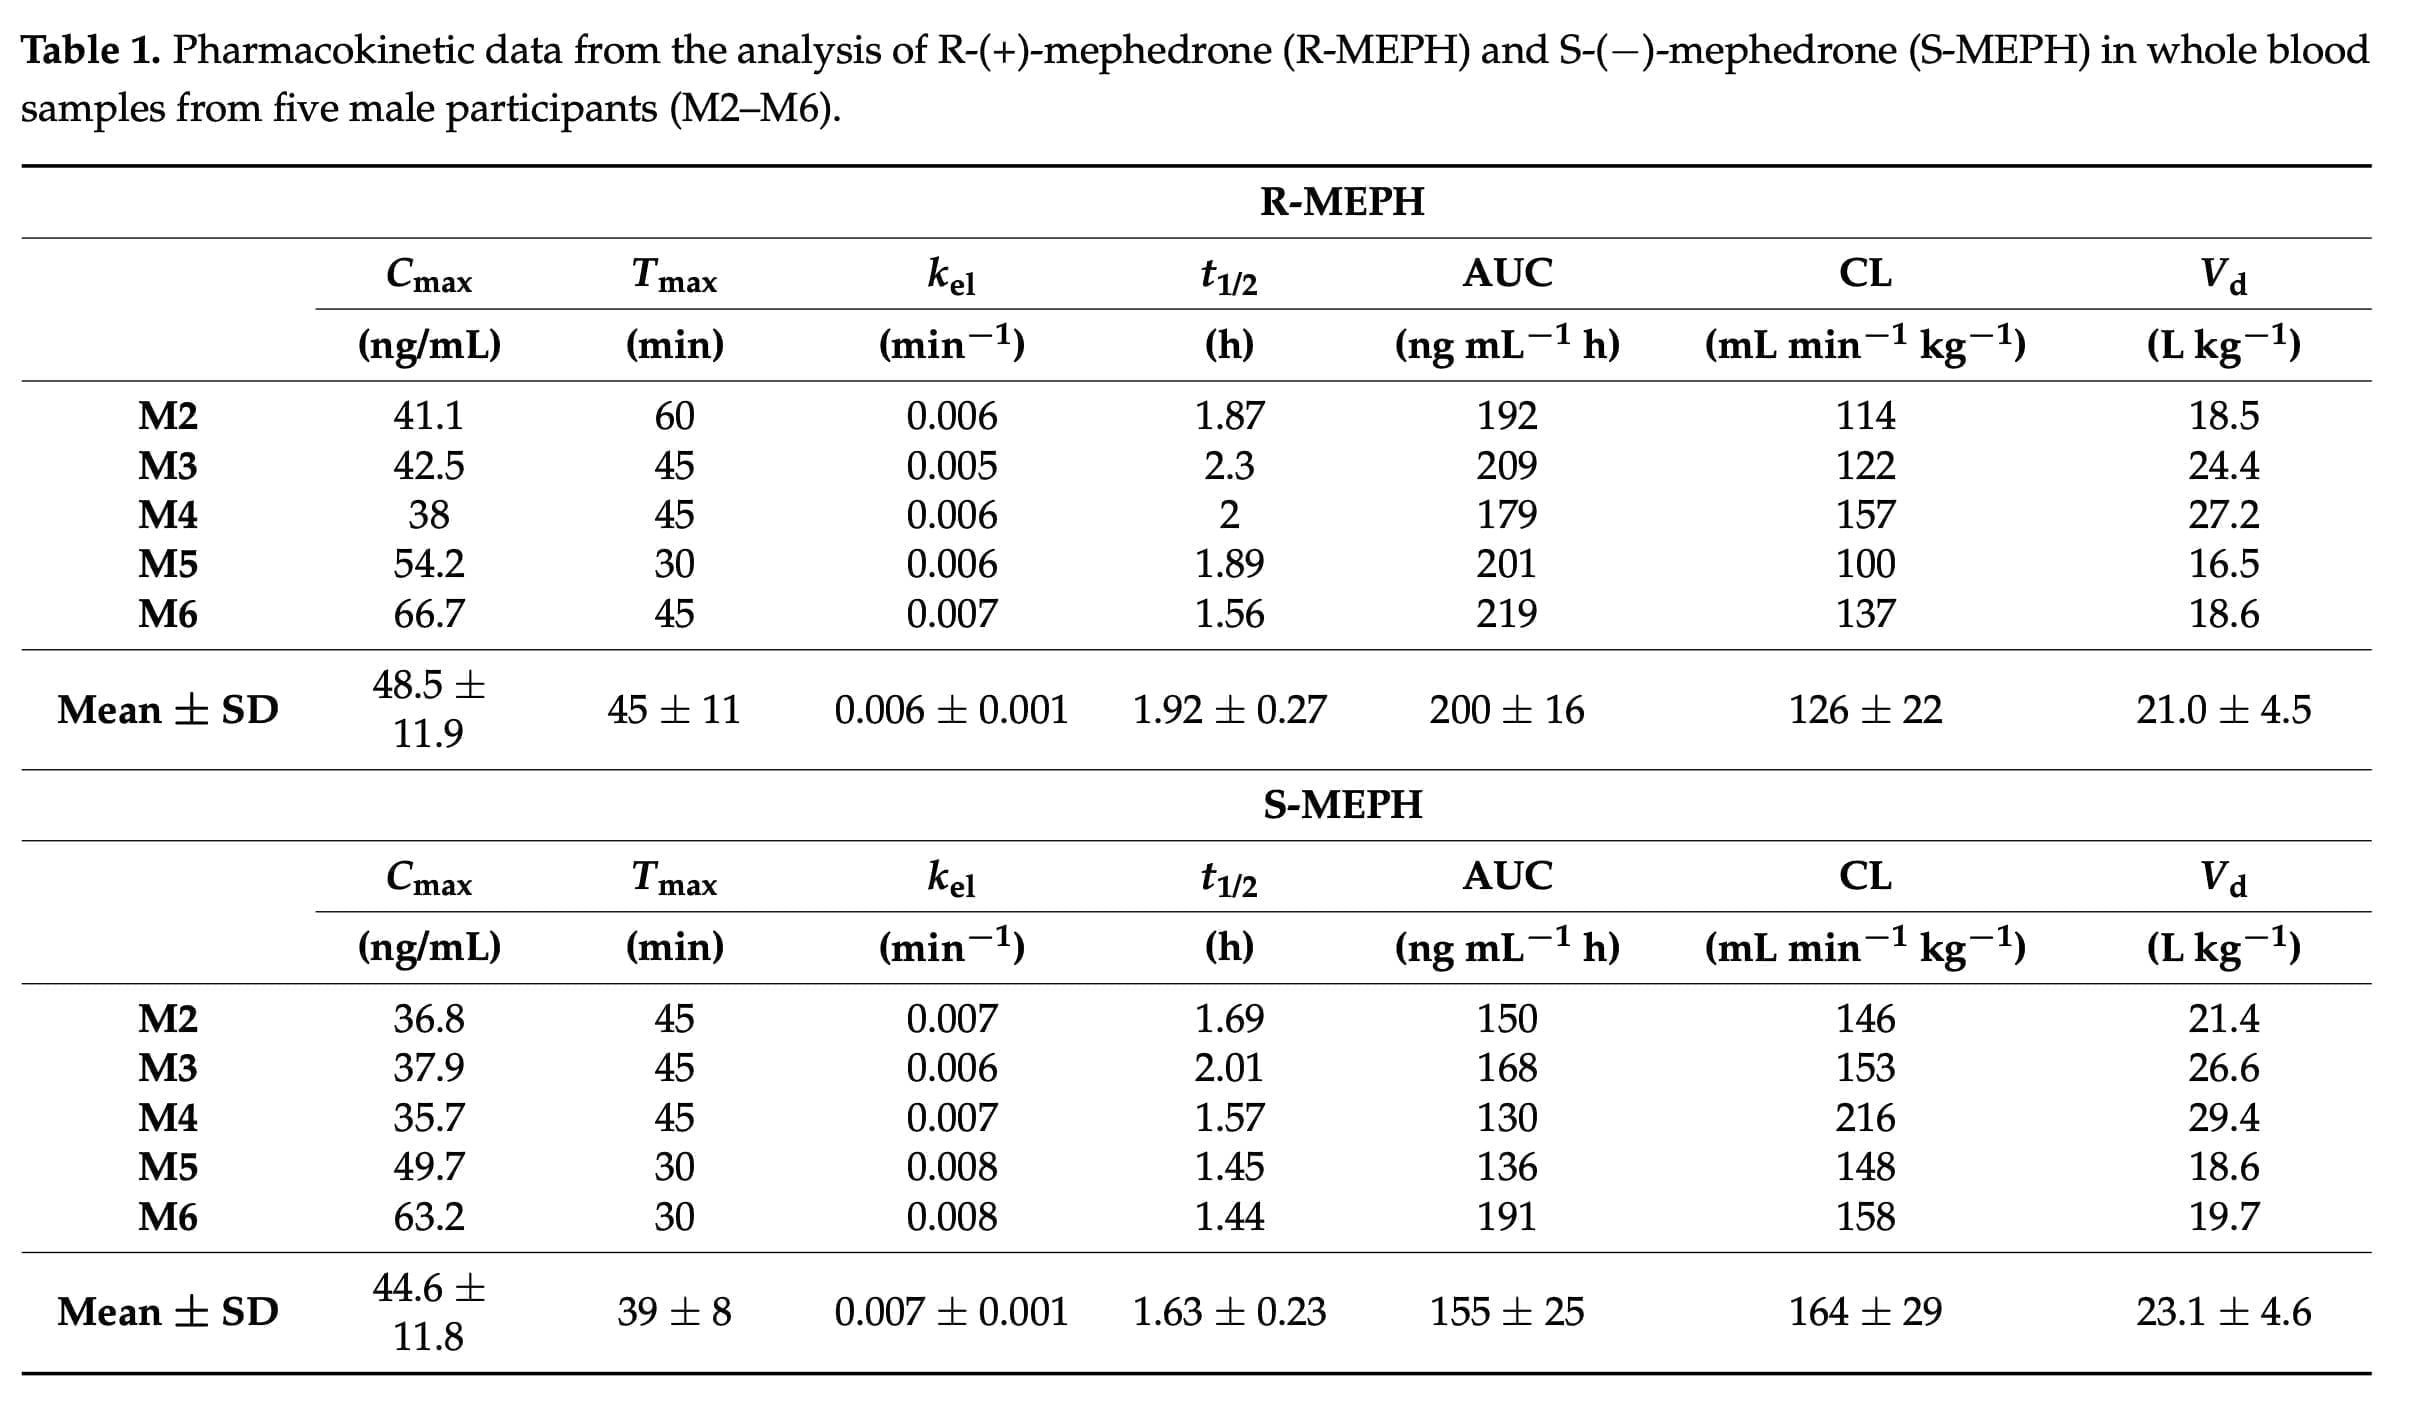 <strong>Pharmacokinetics of mephedrone during intranasal use</strong>